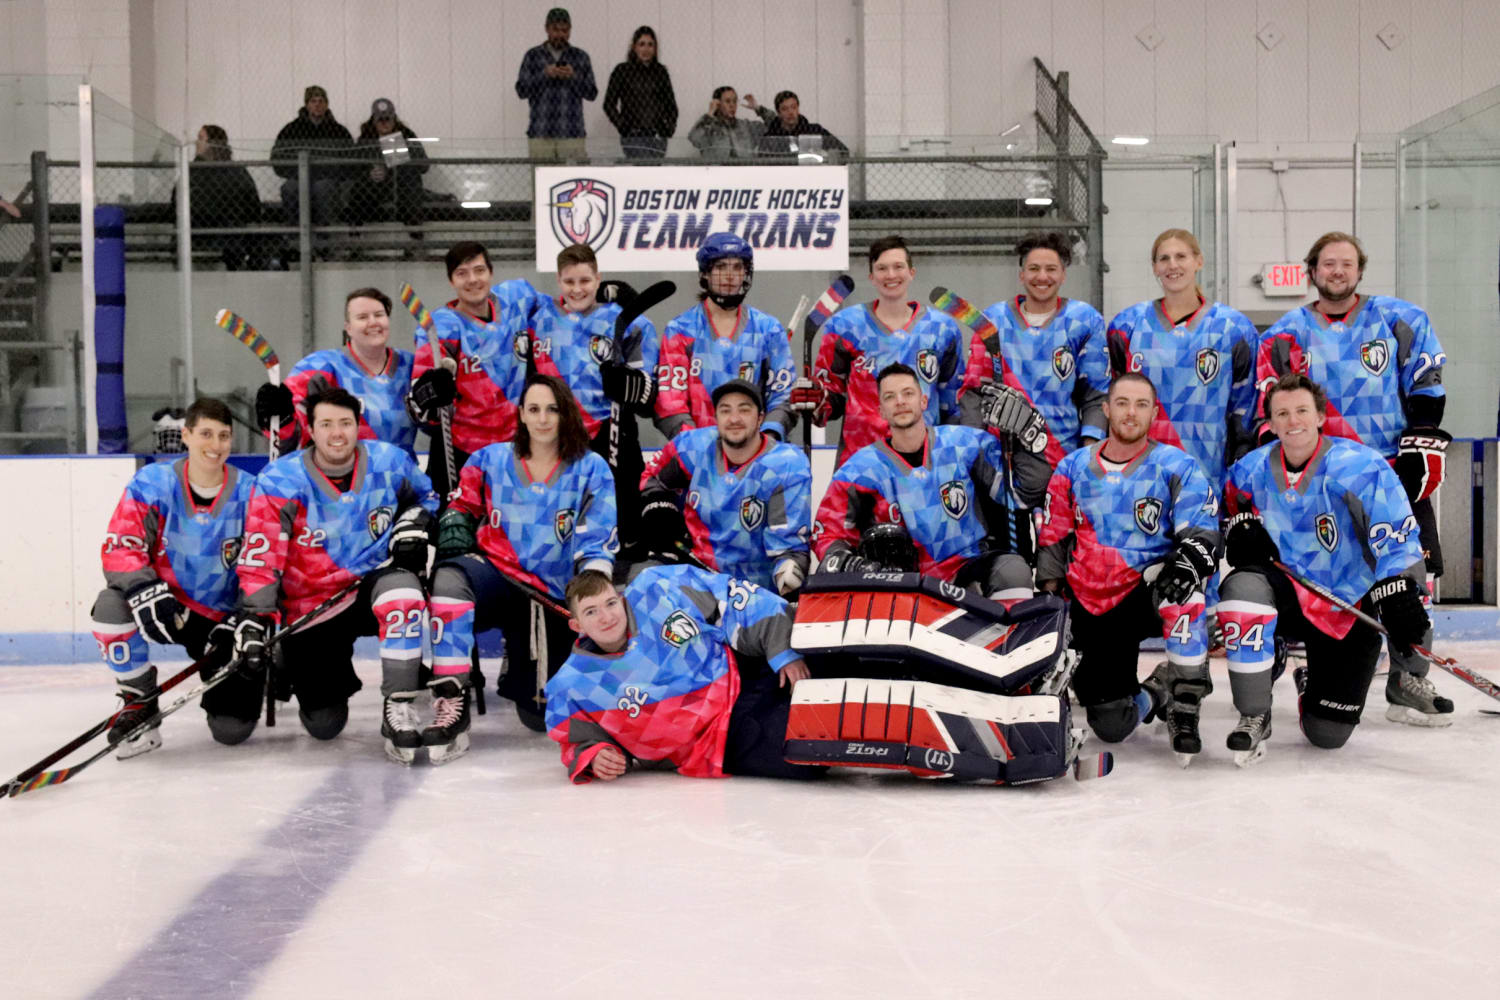 In Boston, the first trans hockey team takes the image